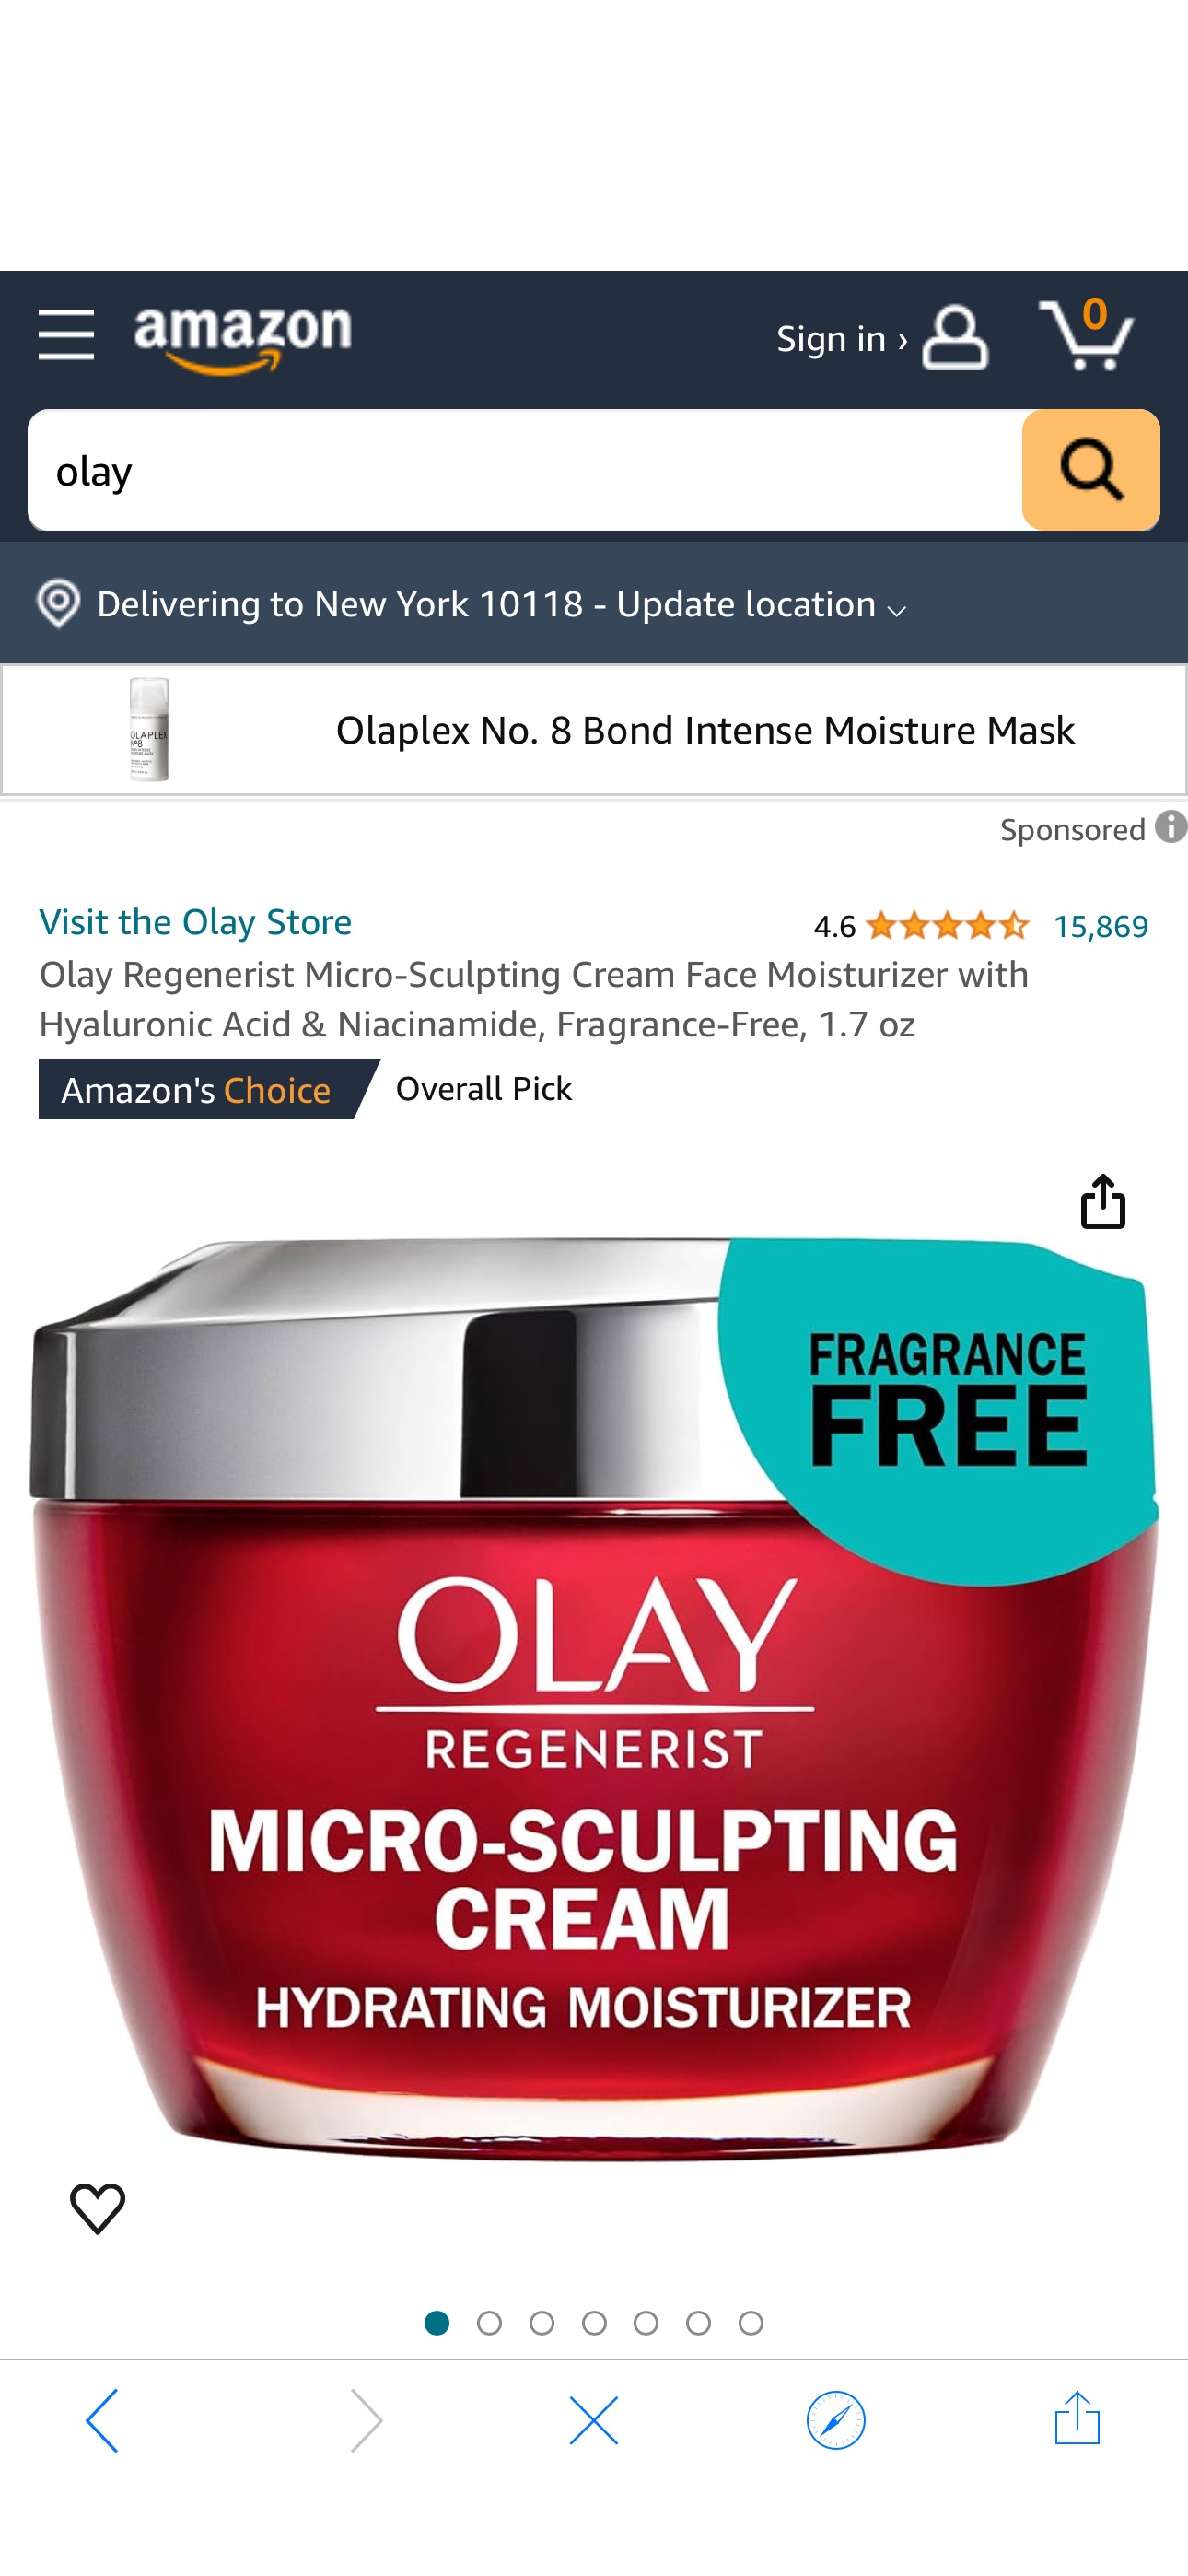 Amazon.com: Olay Regenerist Micro-Sculpting Cream Face Moisturizer with Hyaluronic Acid & Niacinamide, Fragrance-Free, 1.7 oz : Beauty & Personal Care